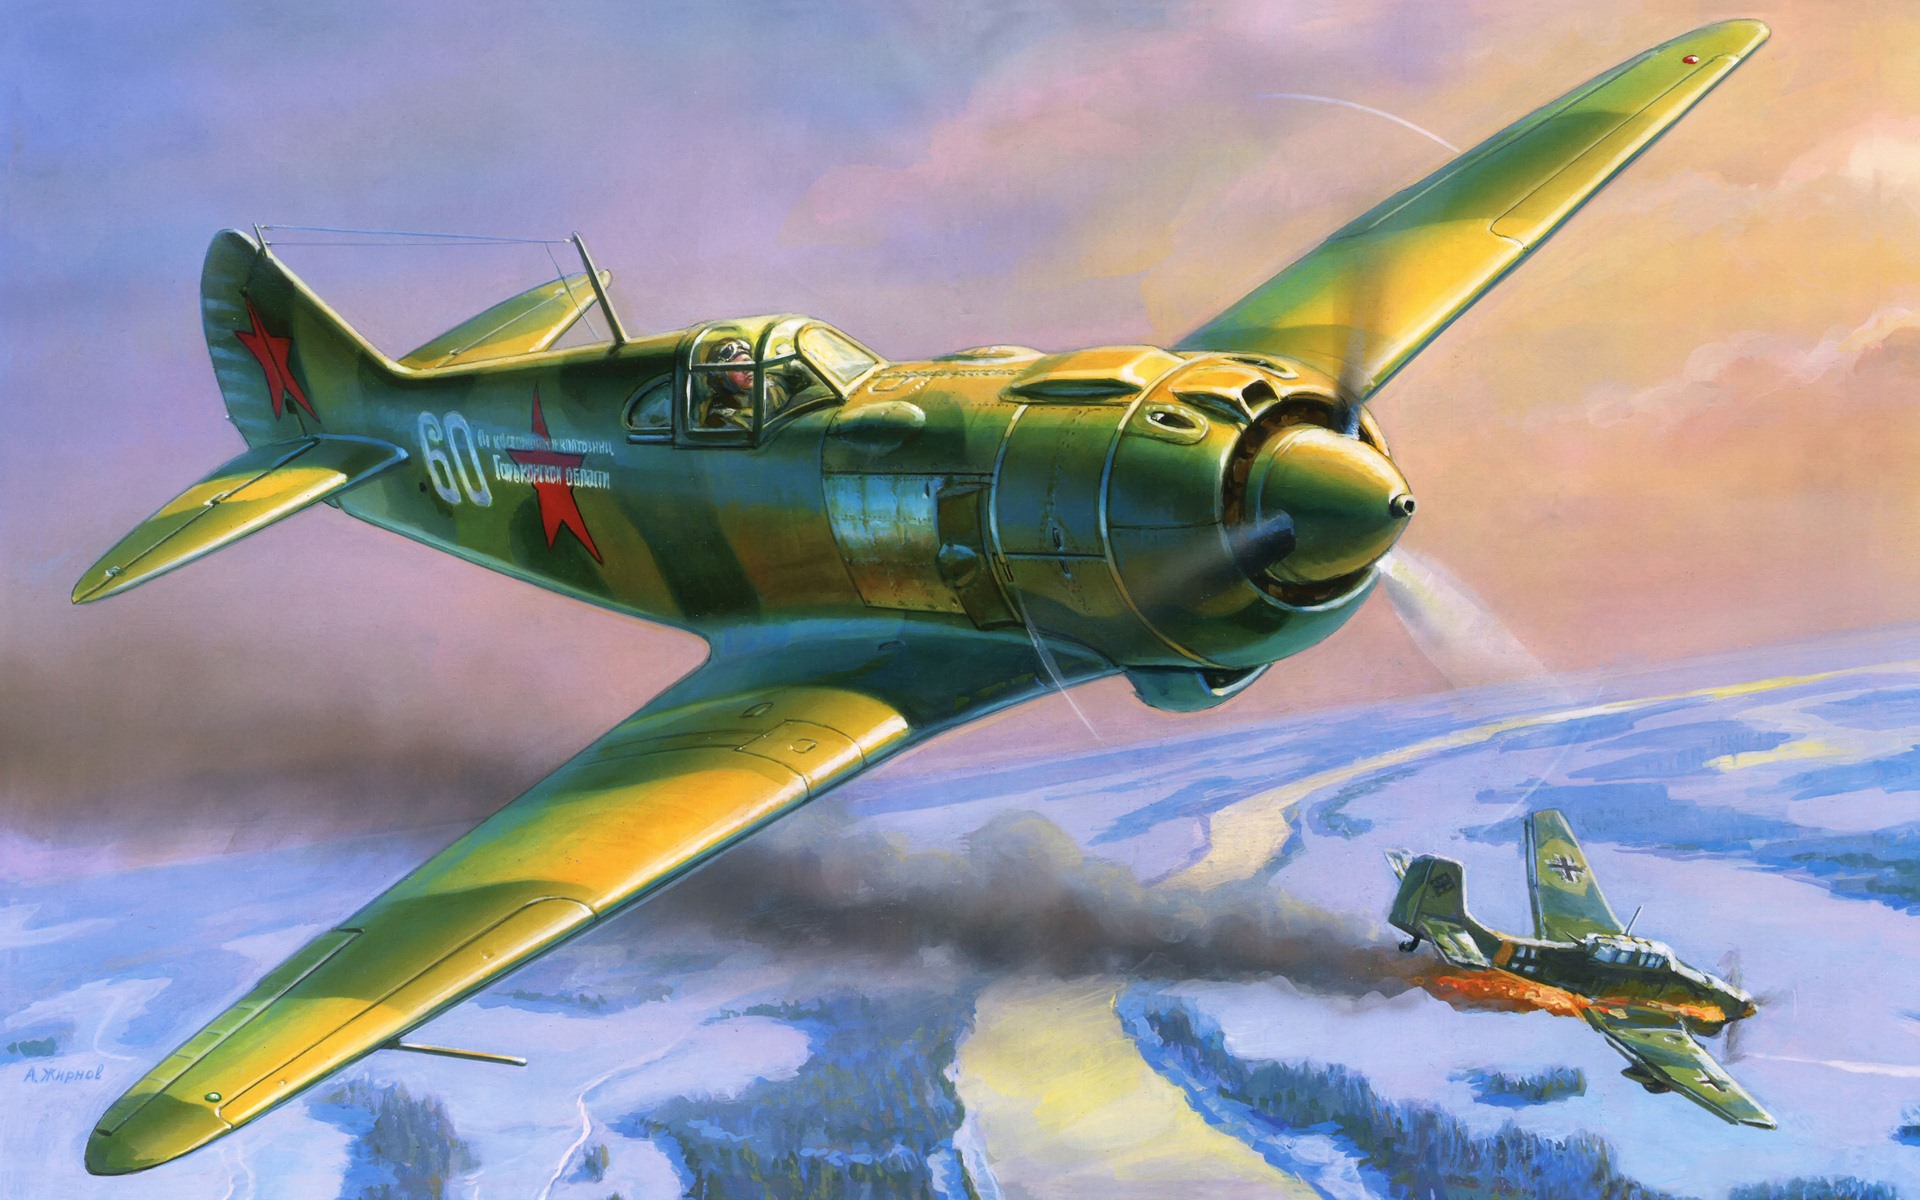 Military aircraft flight exquisite painting wallpapers #20 - 1920x1200